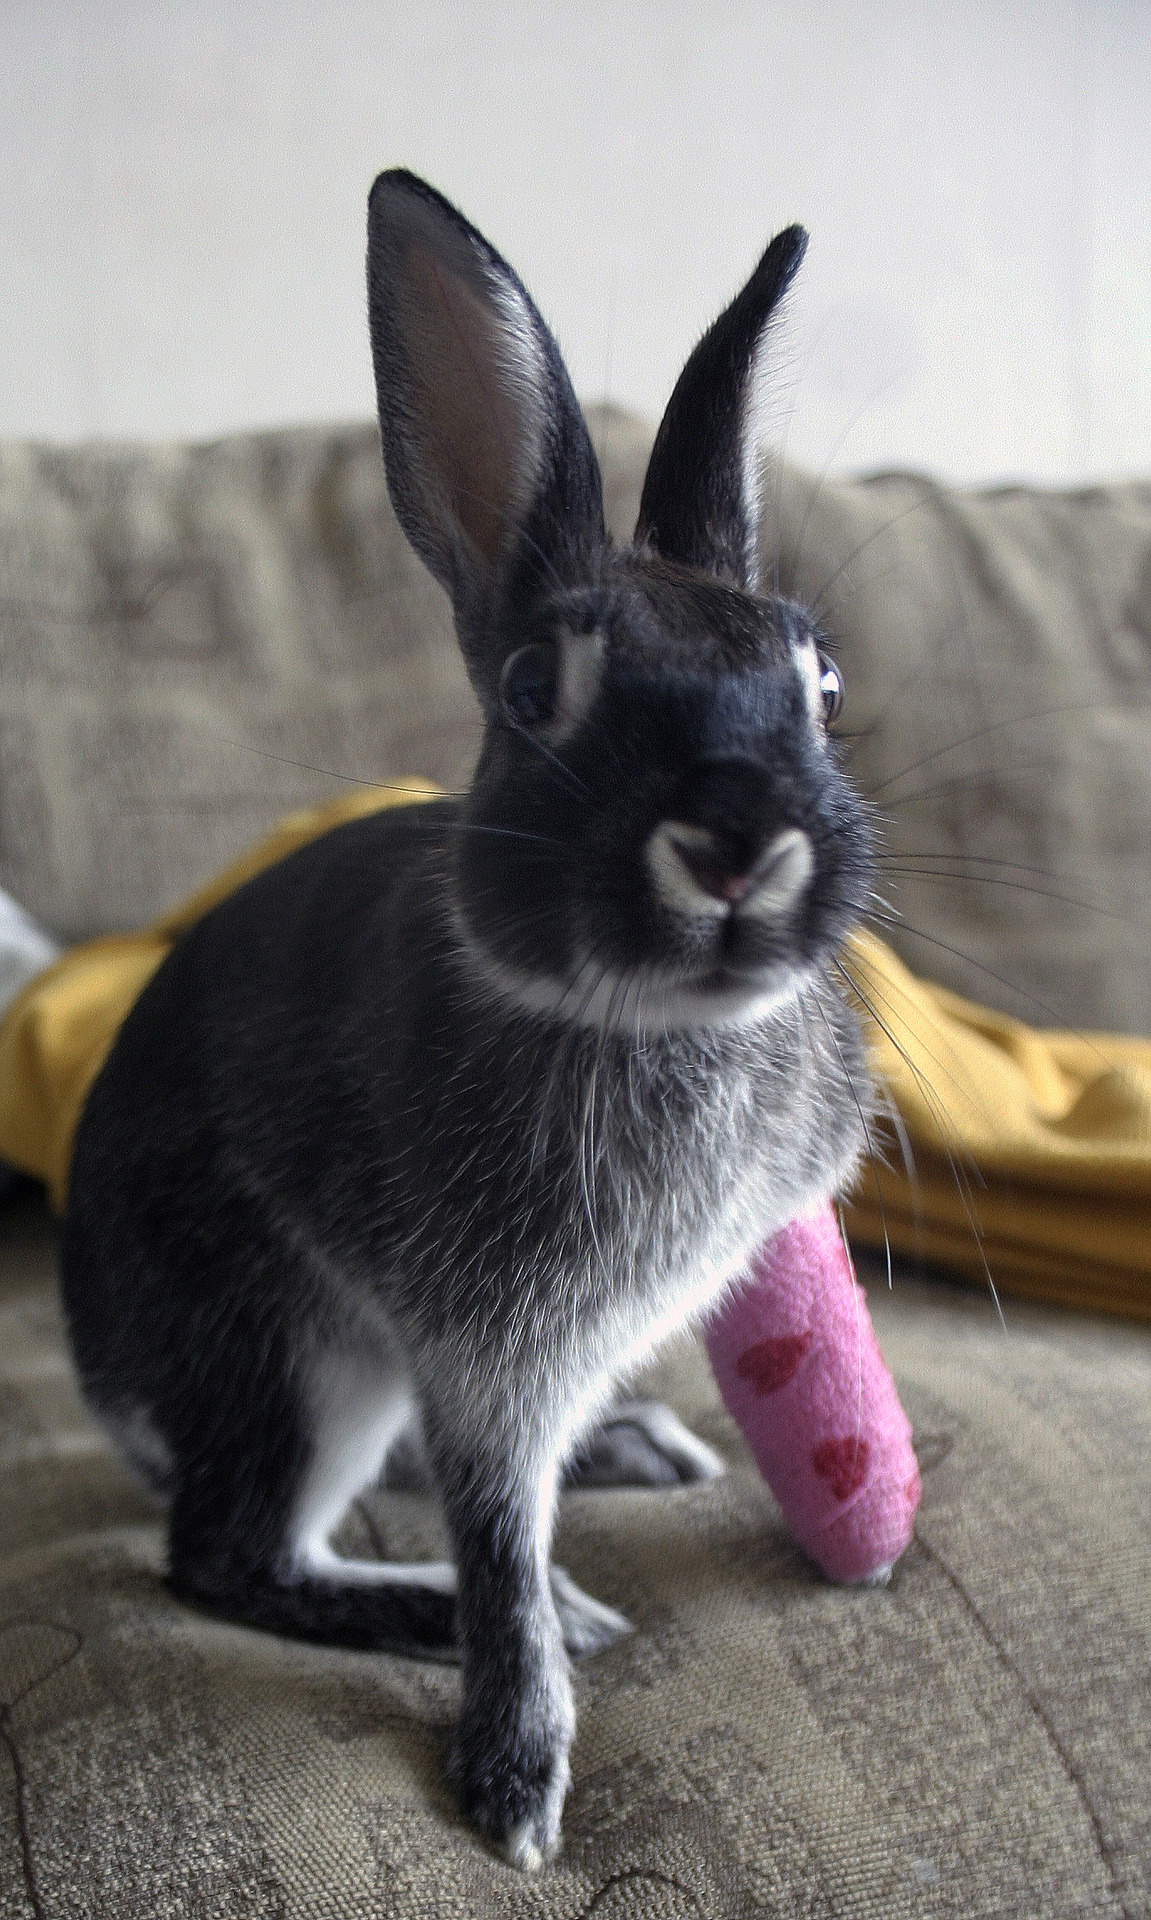 Want to Sign Bunny's Cast?